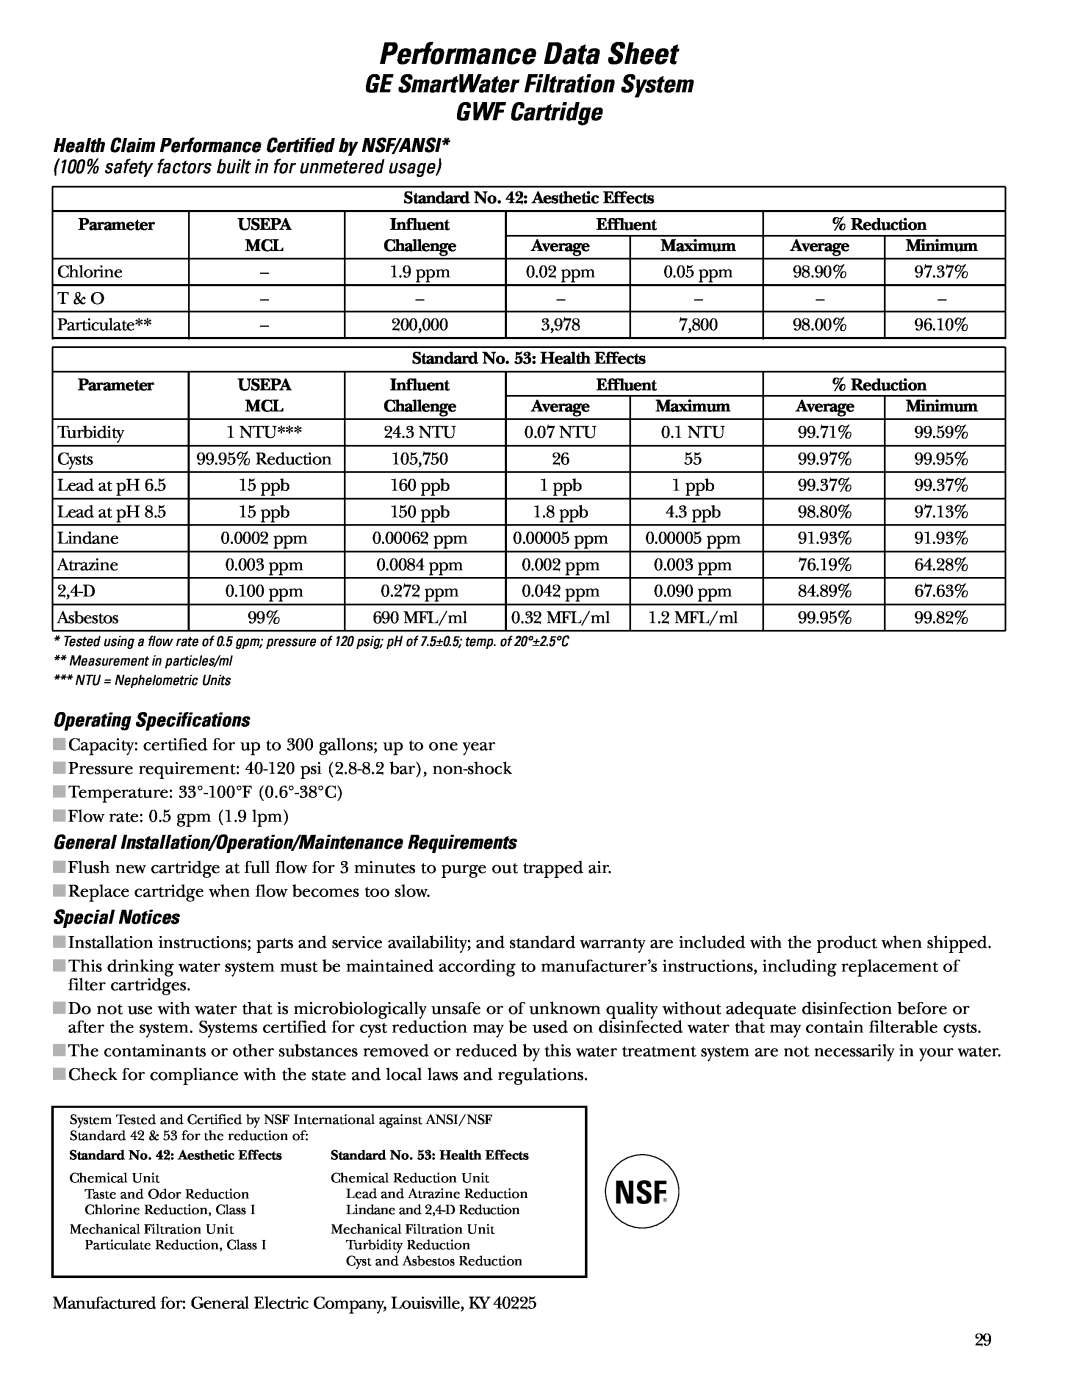 GE Monogram ZIS42NCB Performance Data Sheet, GE SmartWater Filtration System GWF Cartridge, Operating Specifications 